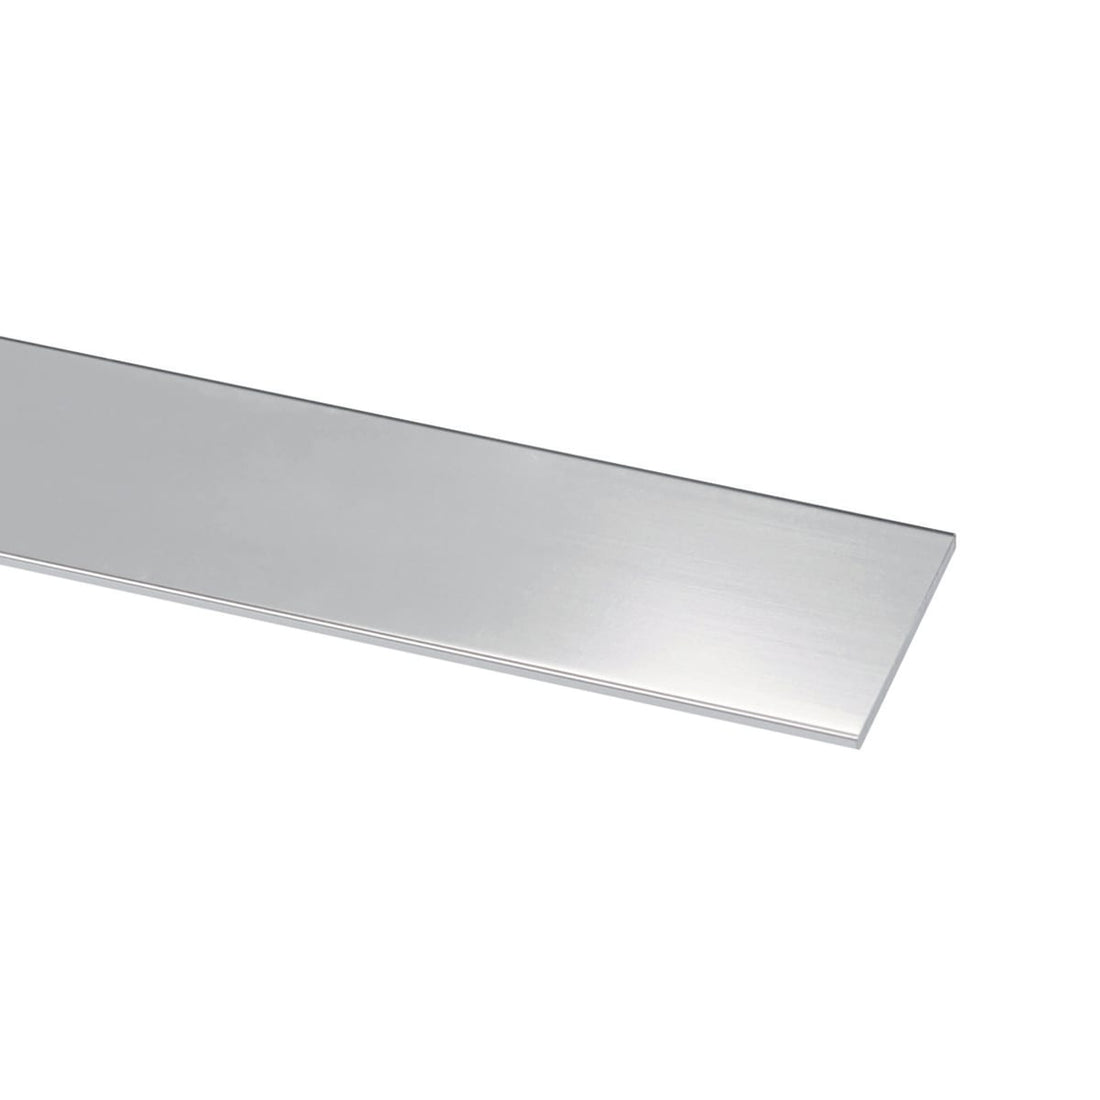 FLAT PROFILE 25X1MM 2MT STAINLESS STEEL AISI 304